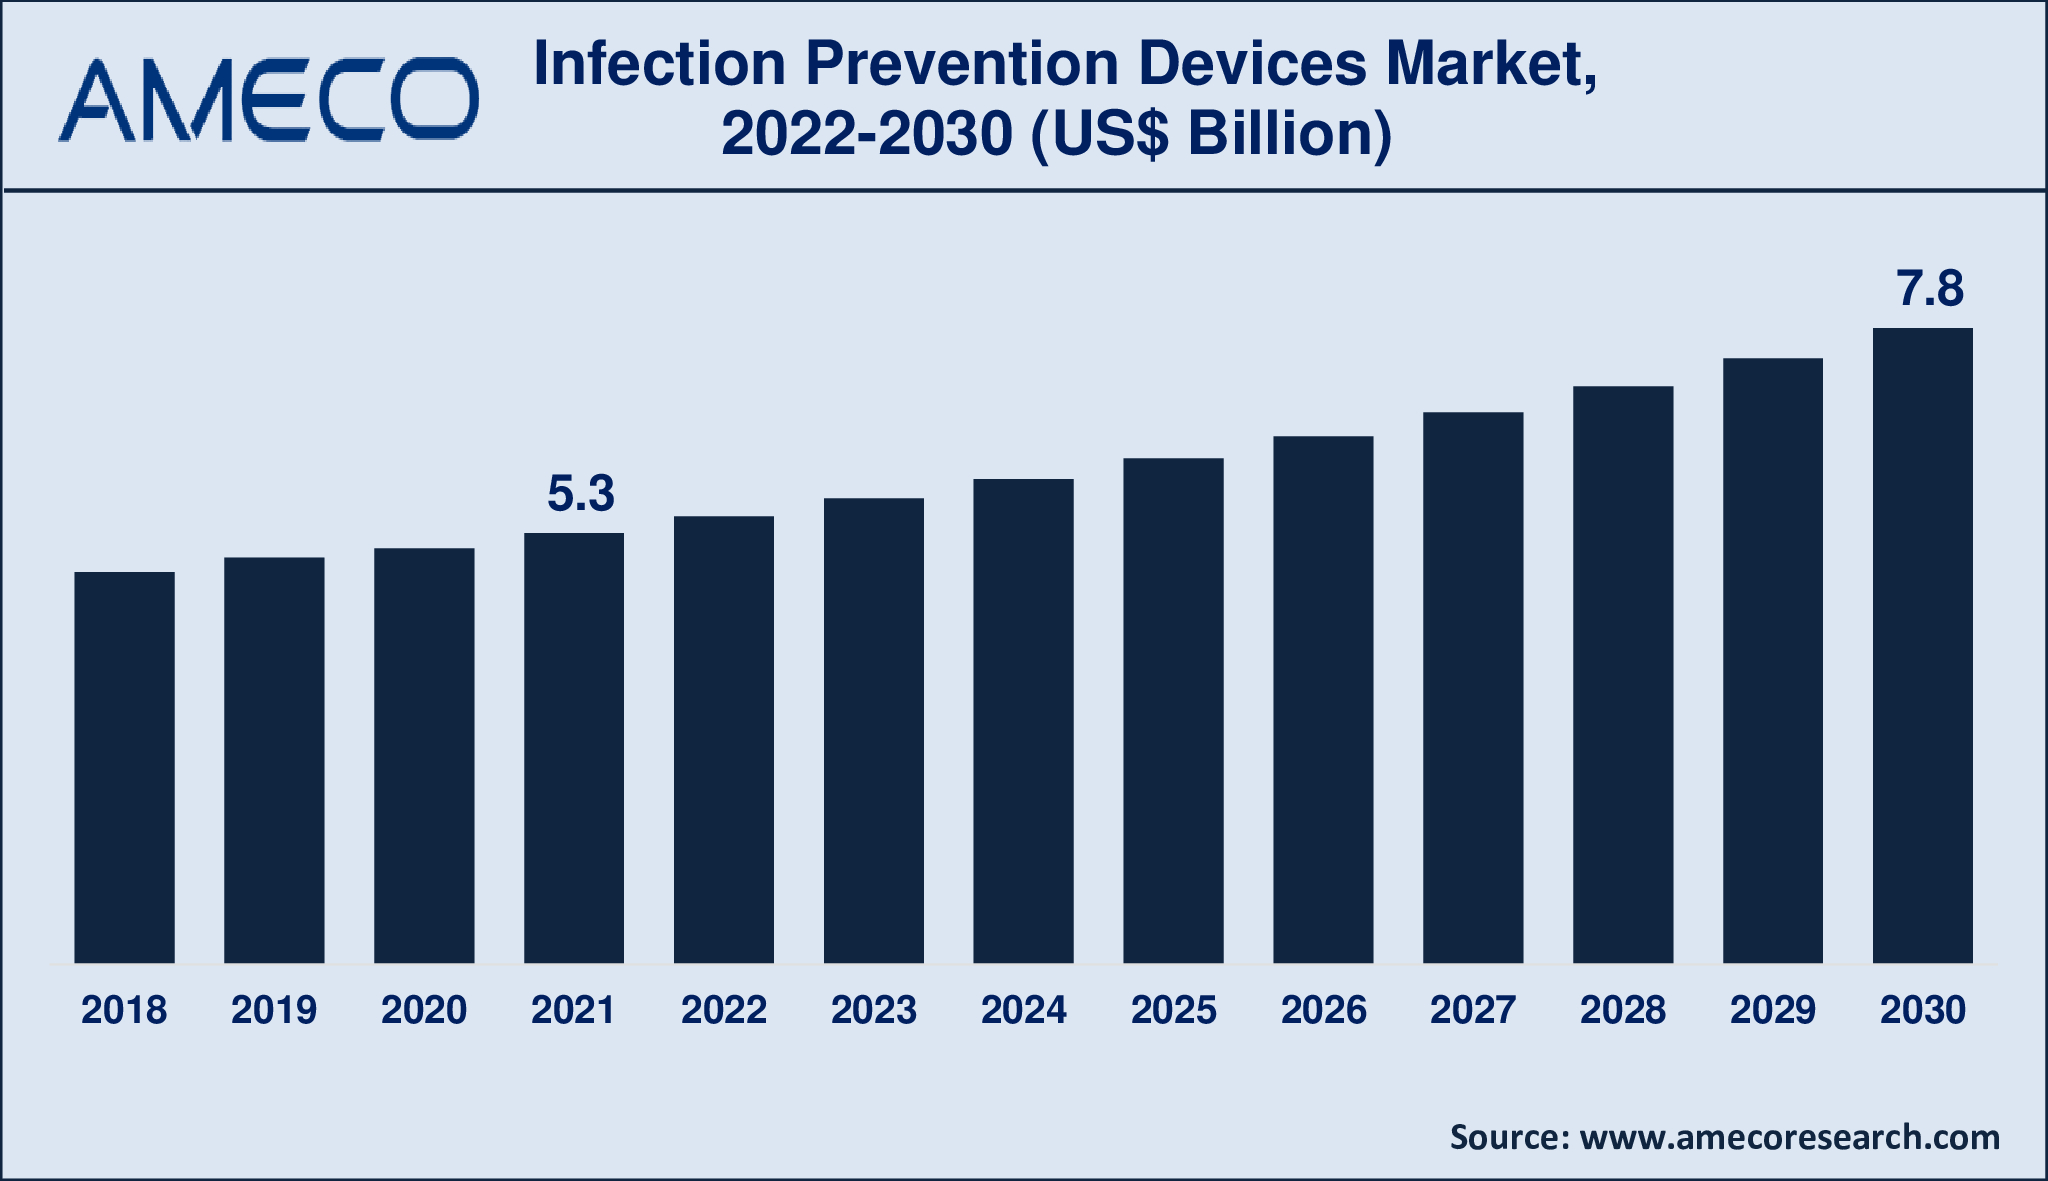 Infection Prevention Devices Market Report 2030